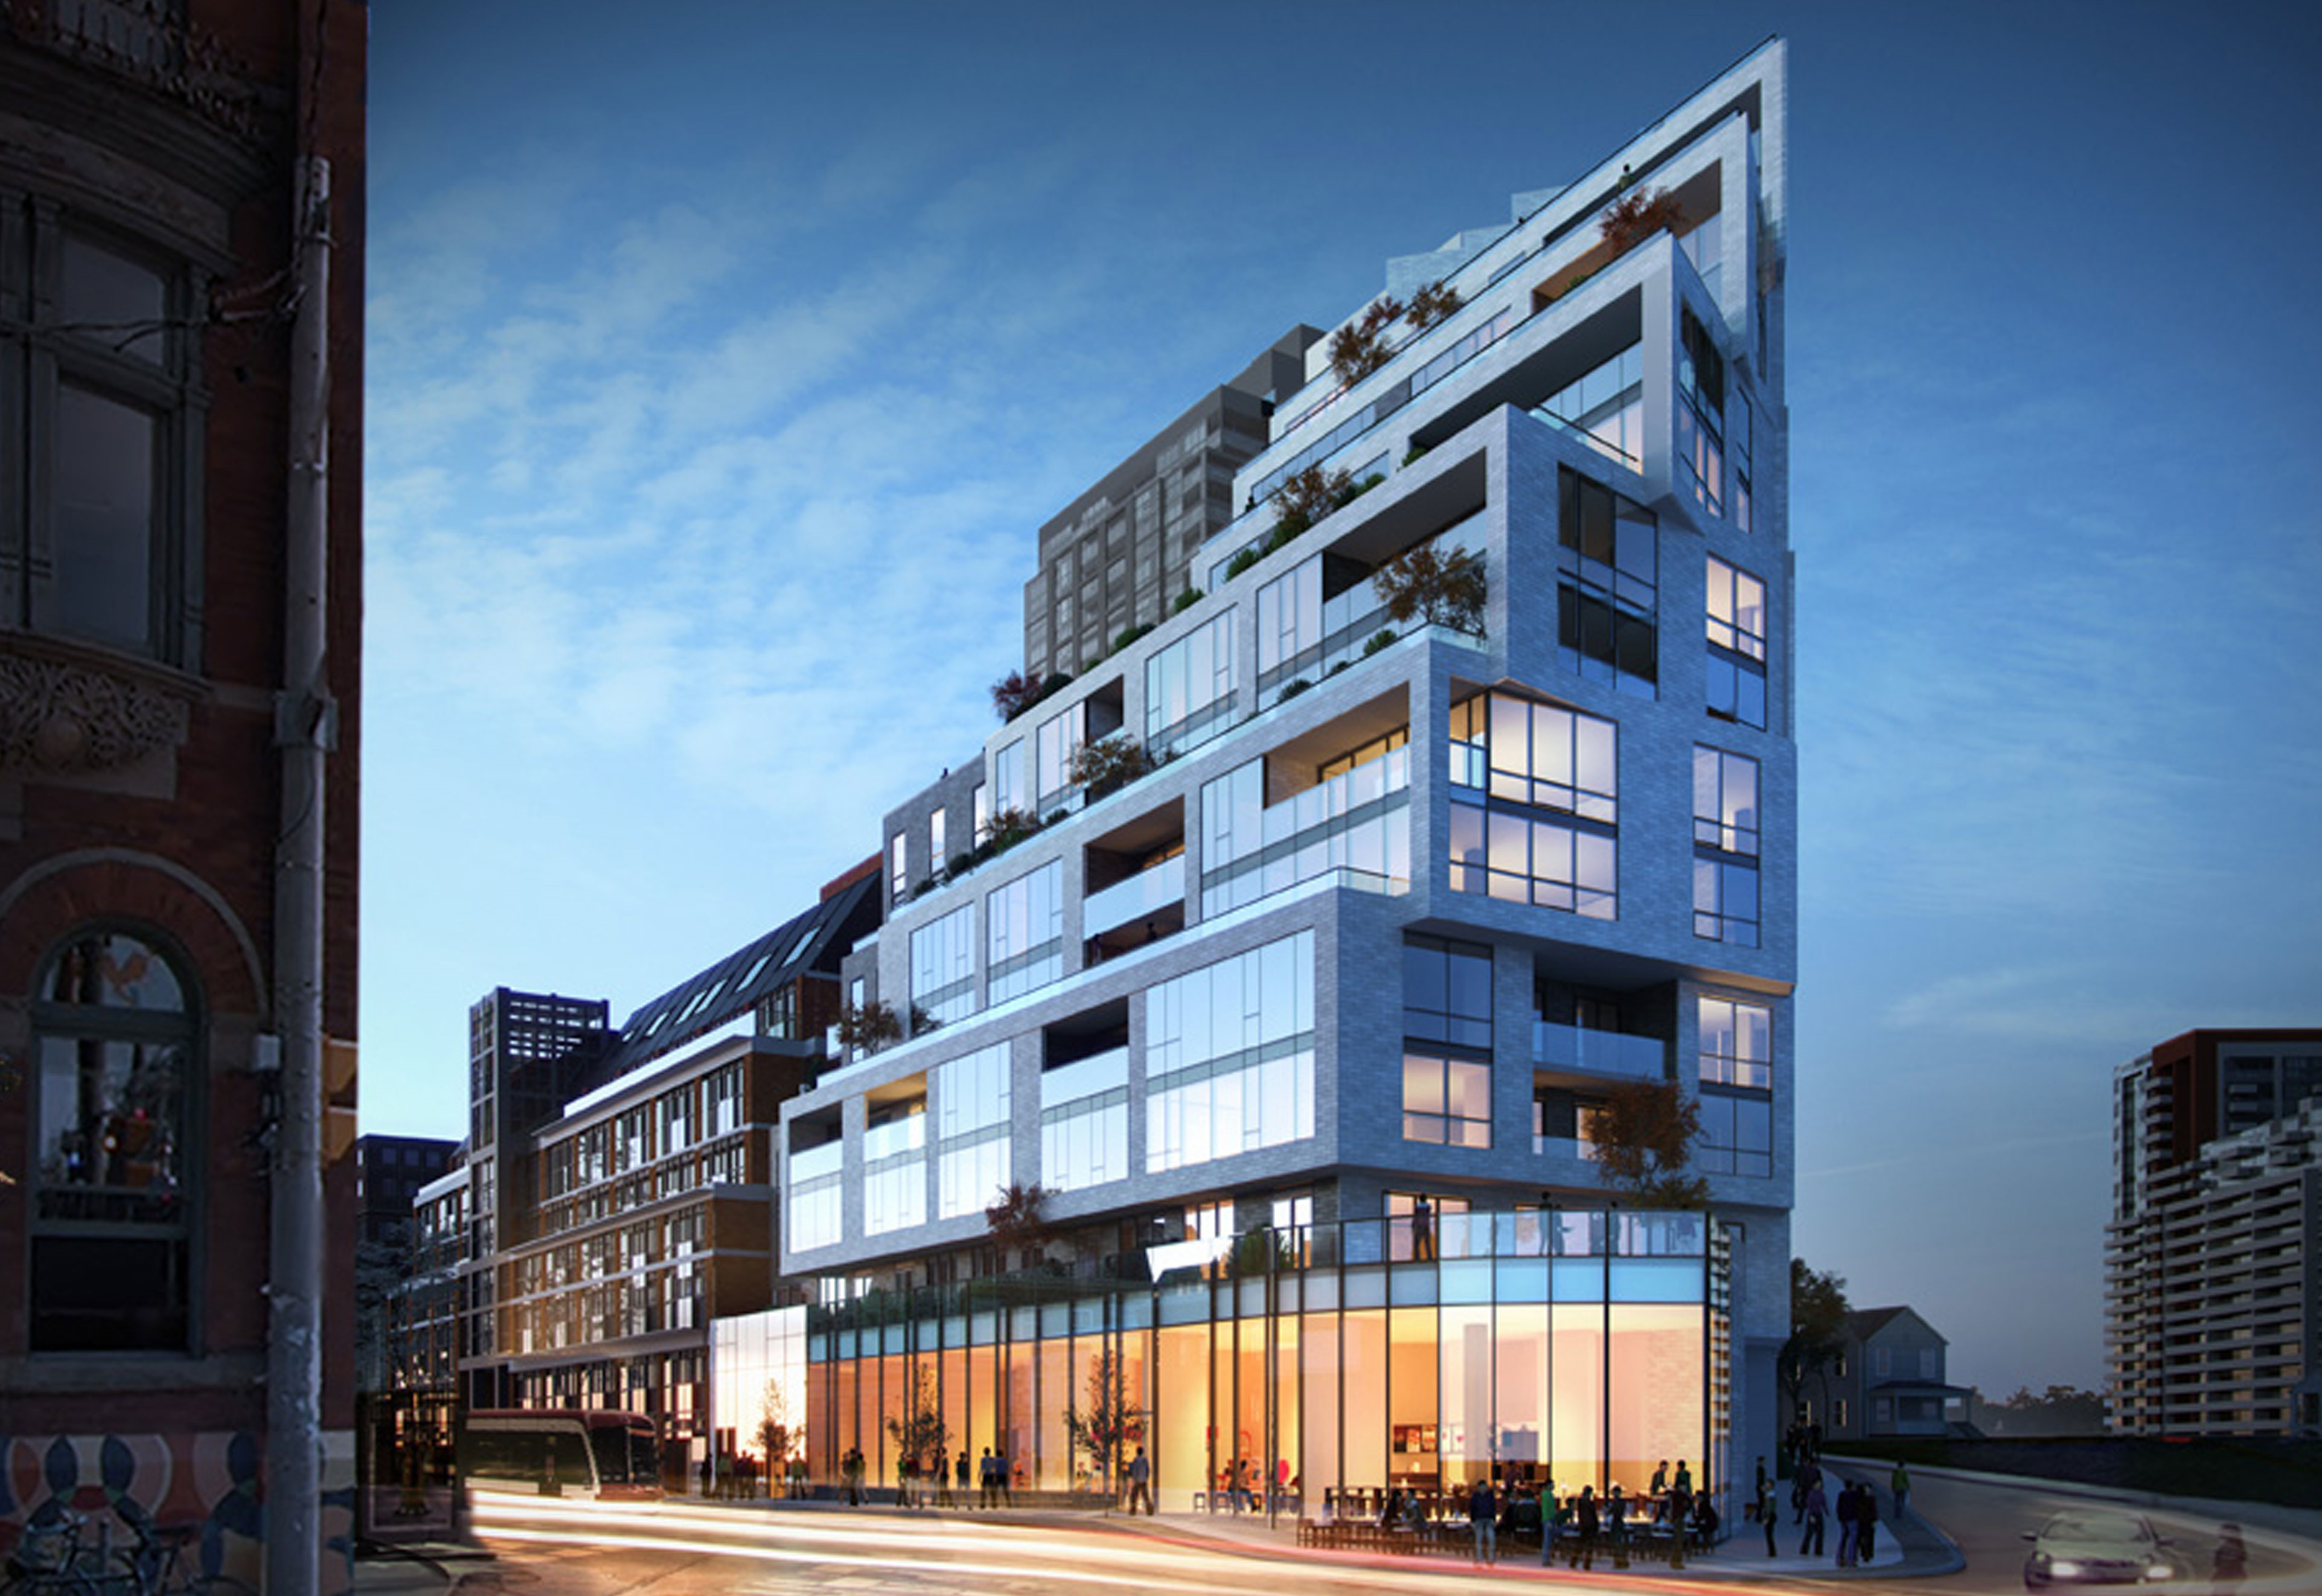 1181 Queen West Condos  Plans, Prices, Reviews